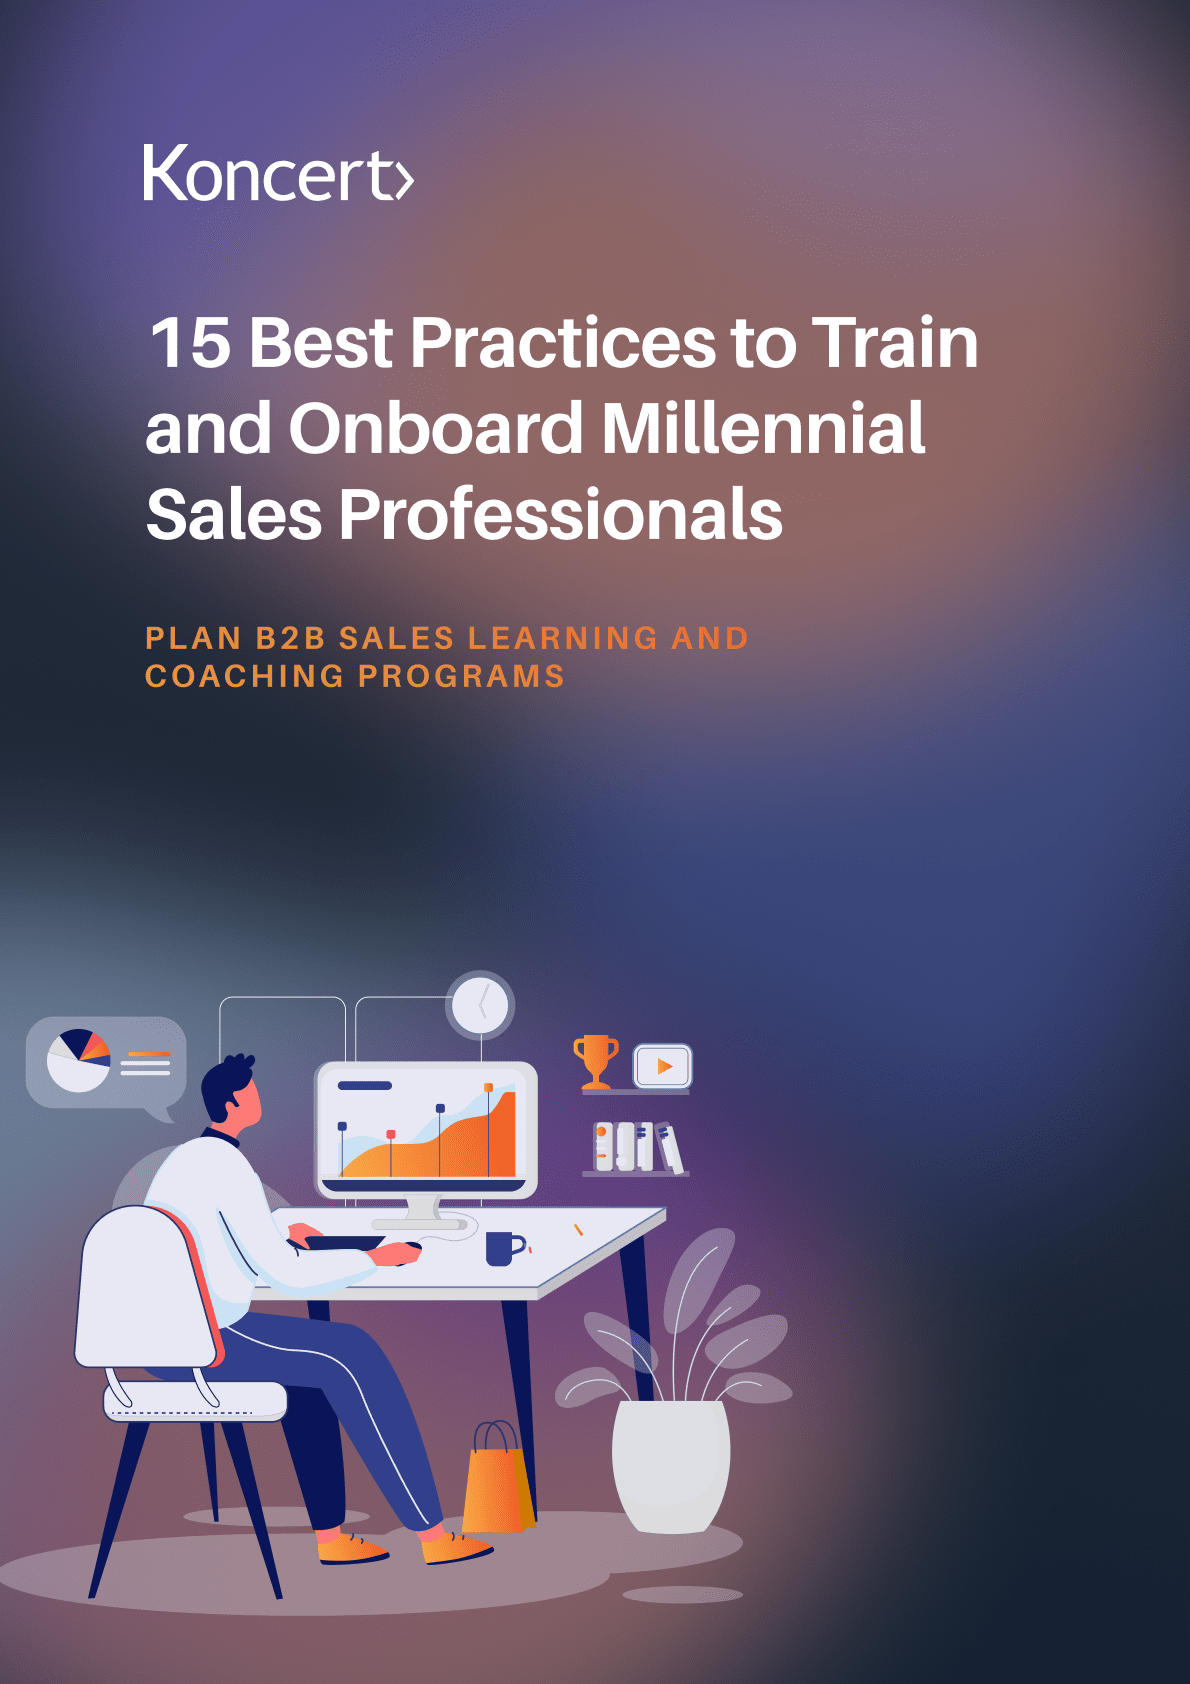 15 Best Practices to Train and Onboard Millennial Sales Professionals